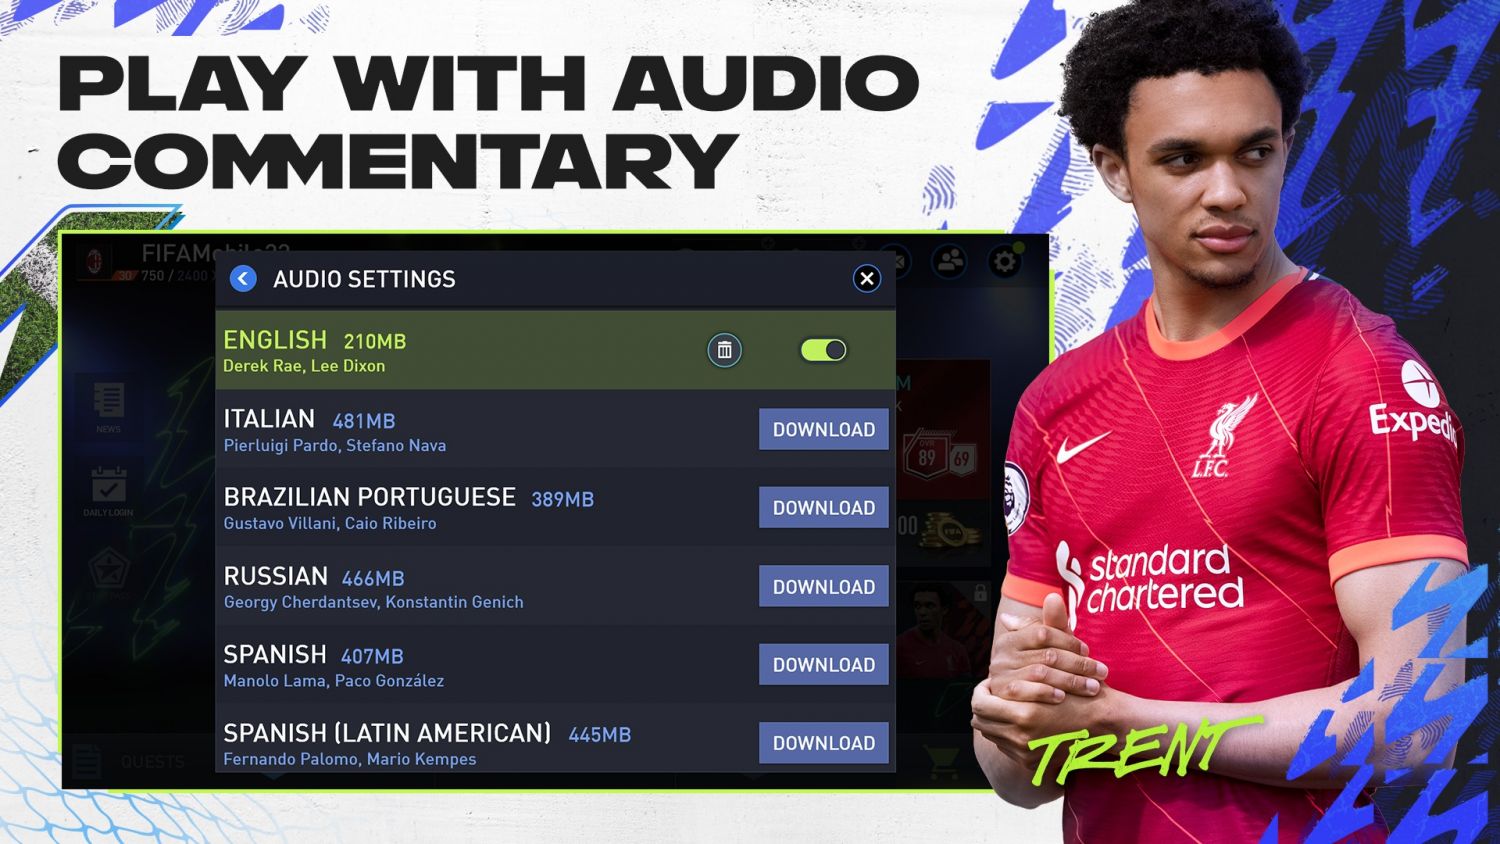 FIFA Mobile - New Season: Audio Preview - EA SPORTS Official Site